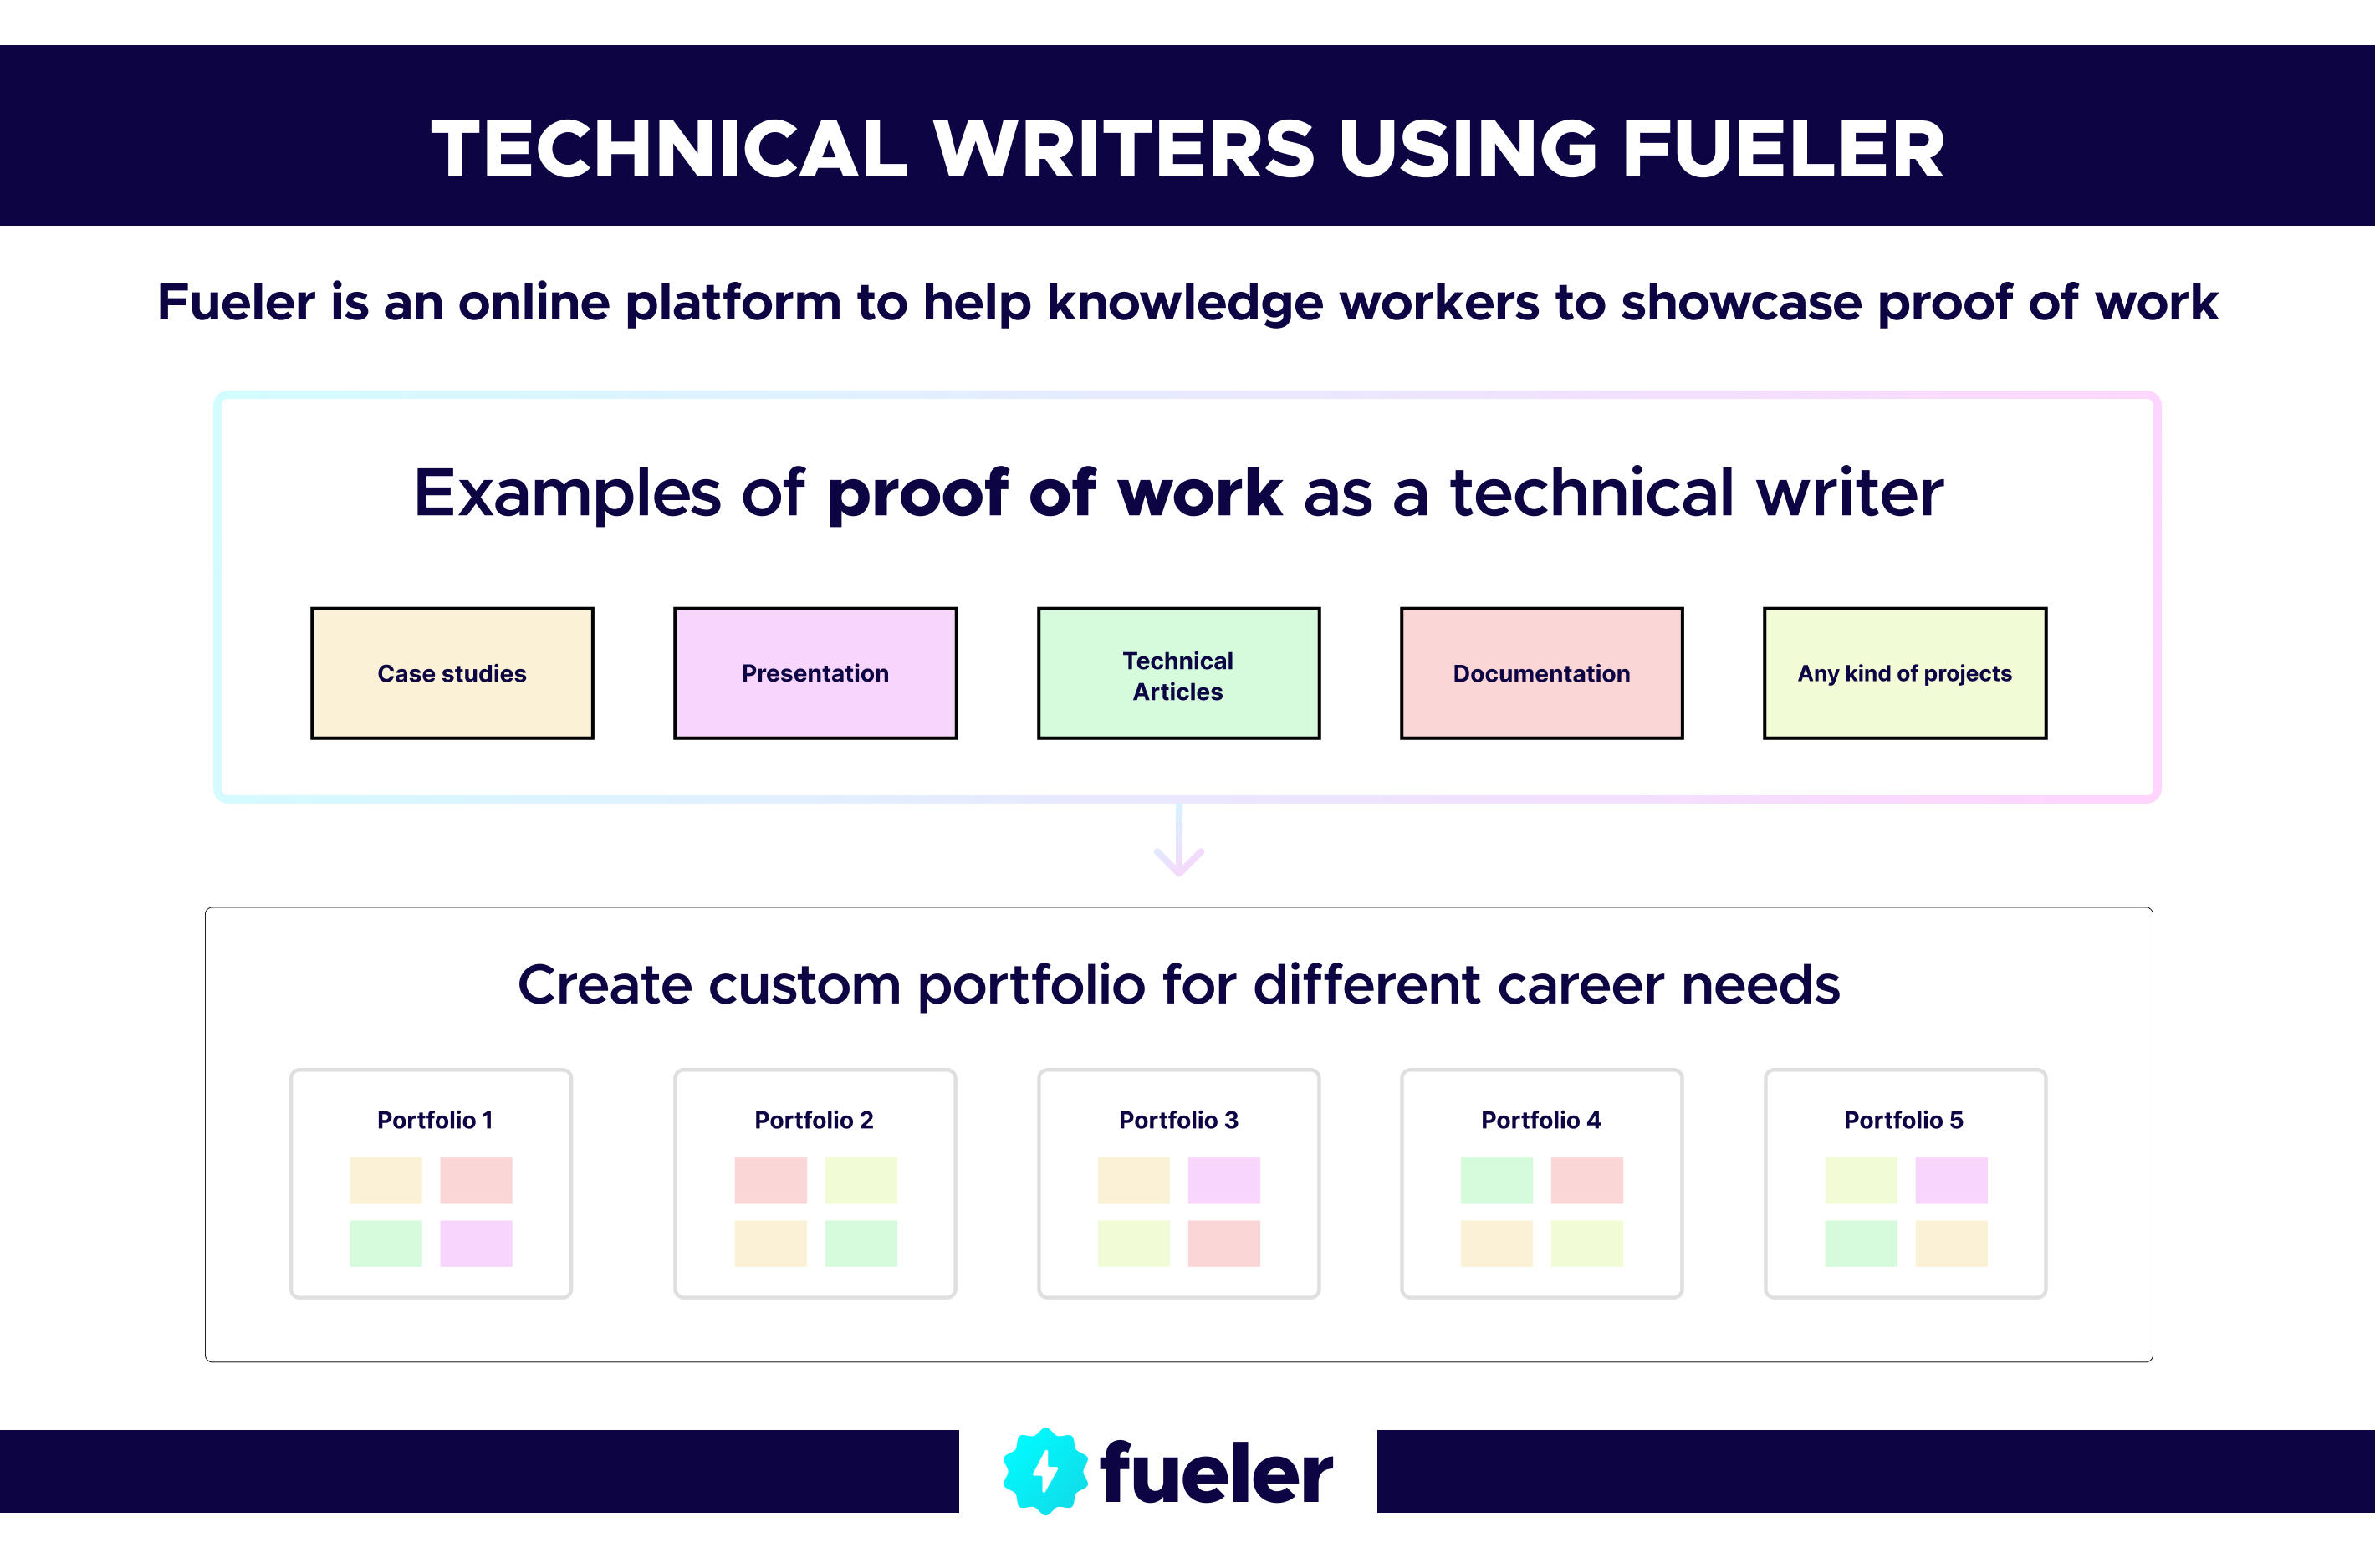 Examples of proof of work as a technical writer